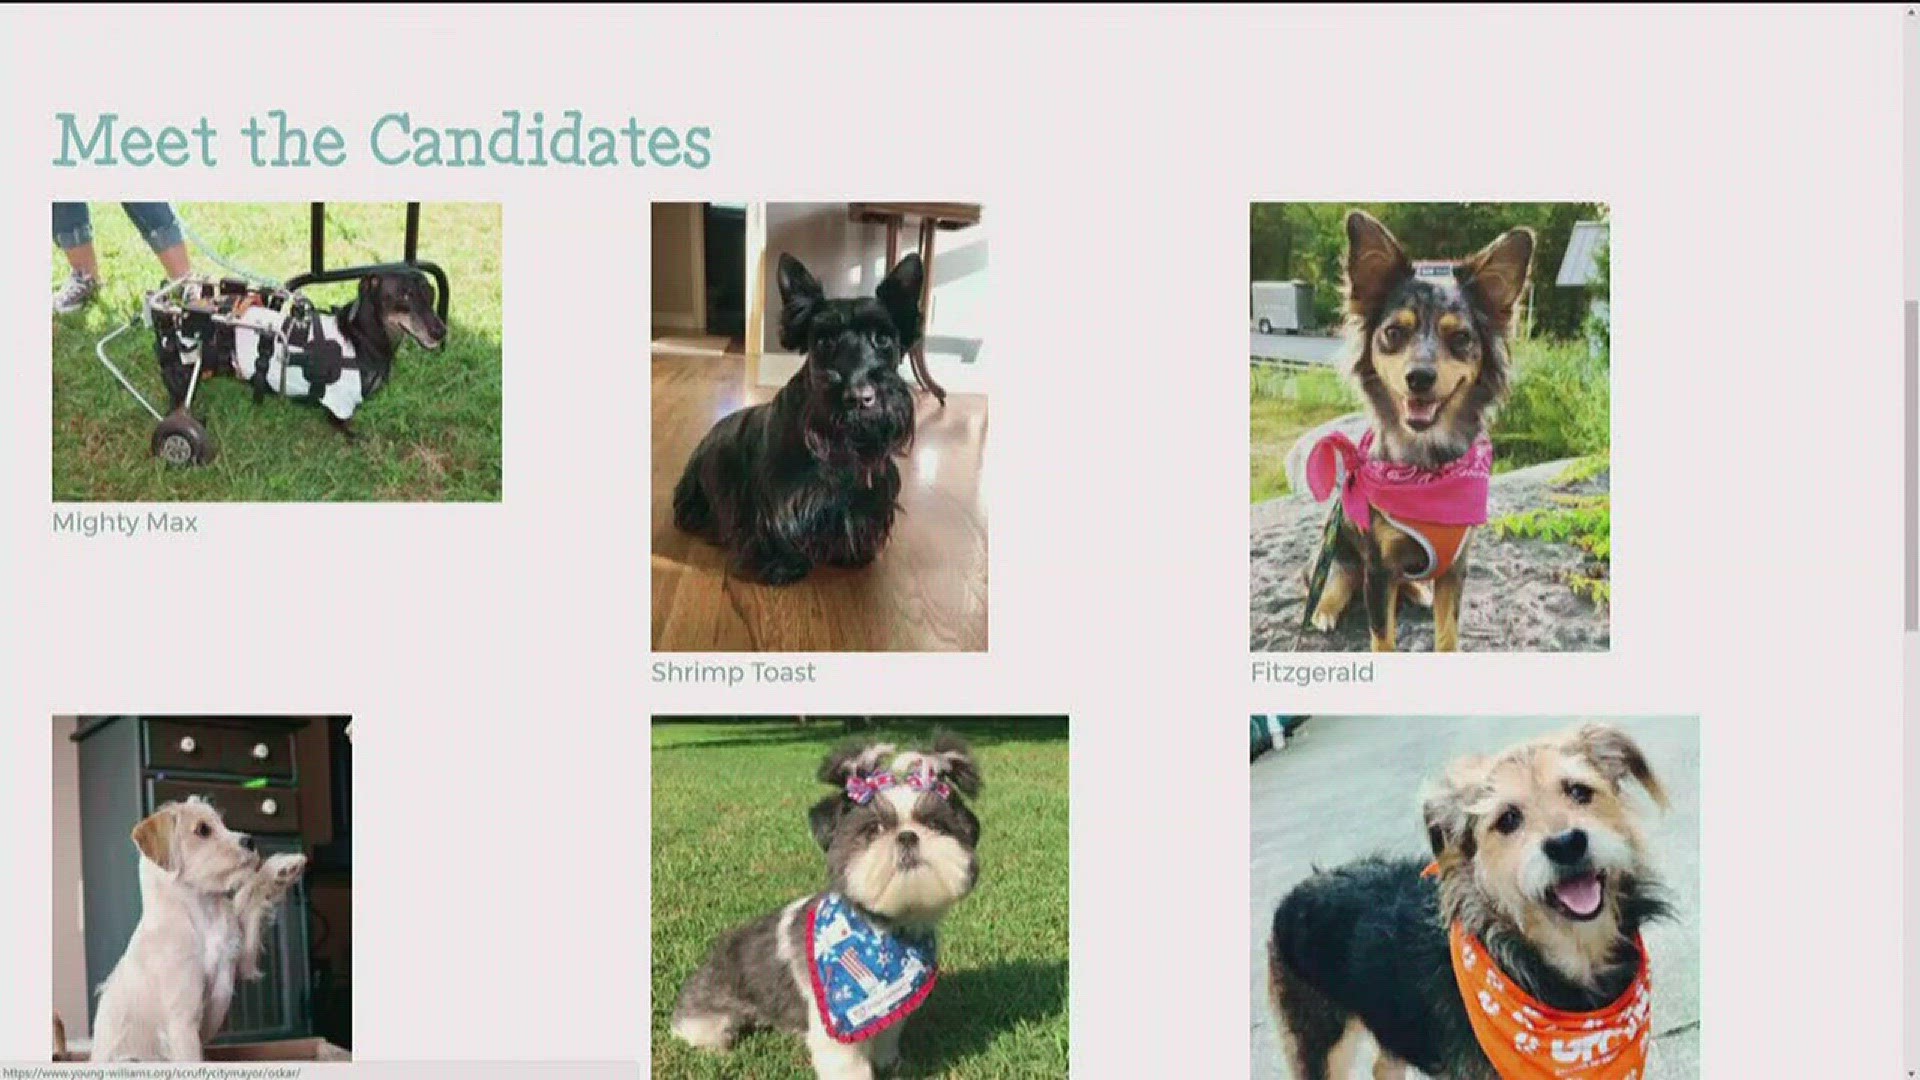 Young-Williams Animal Center is gearing up for the Scruffy City mayoral primary.